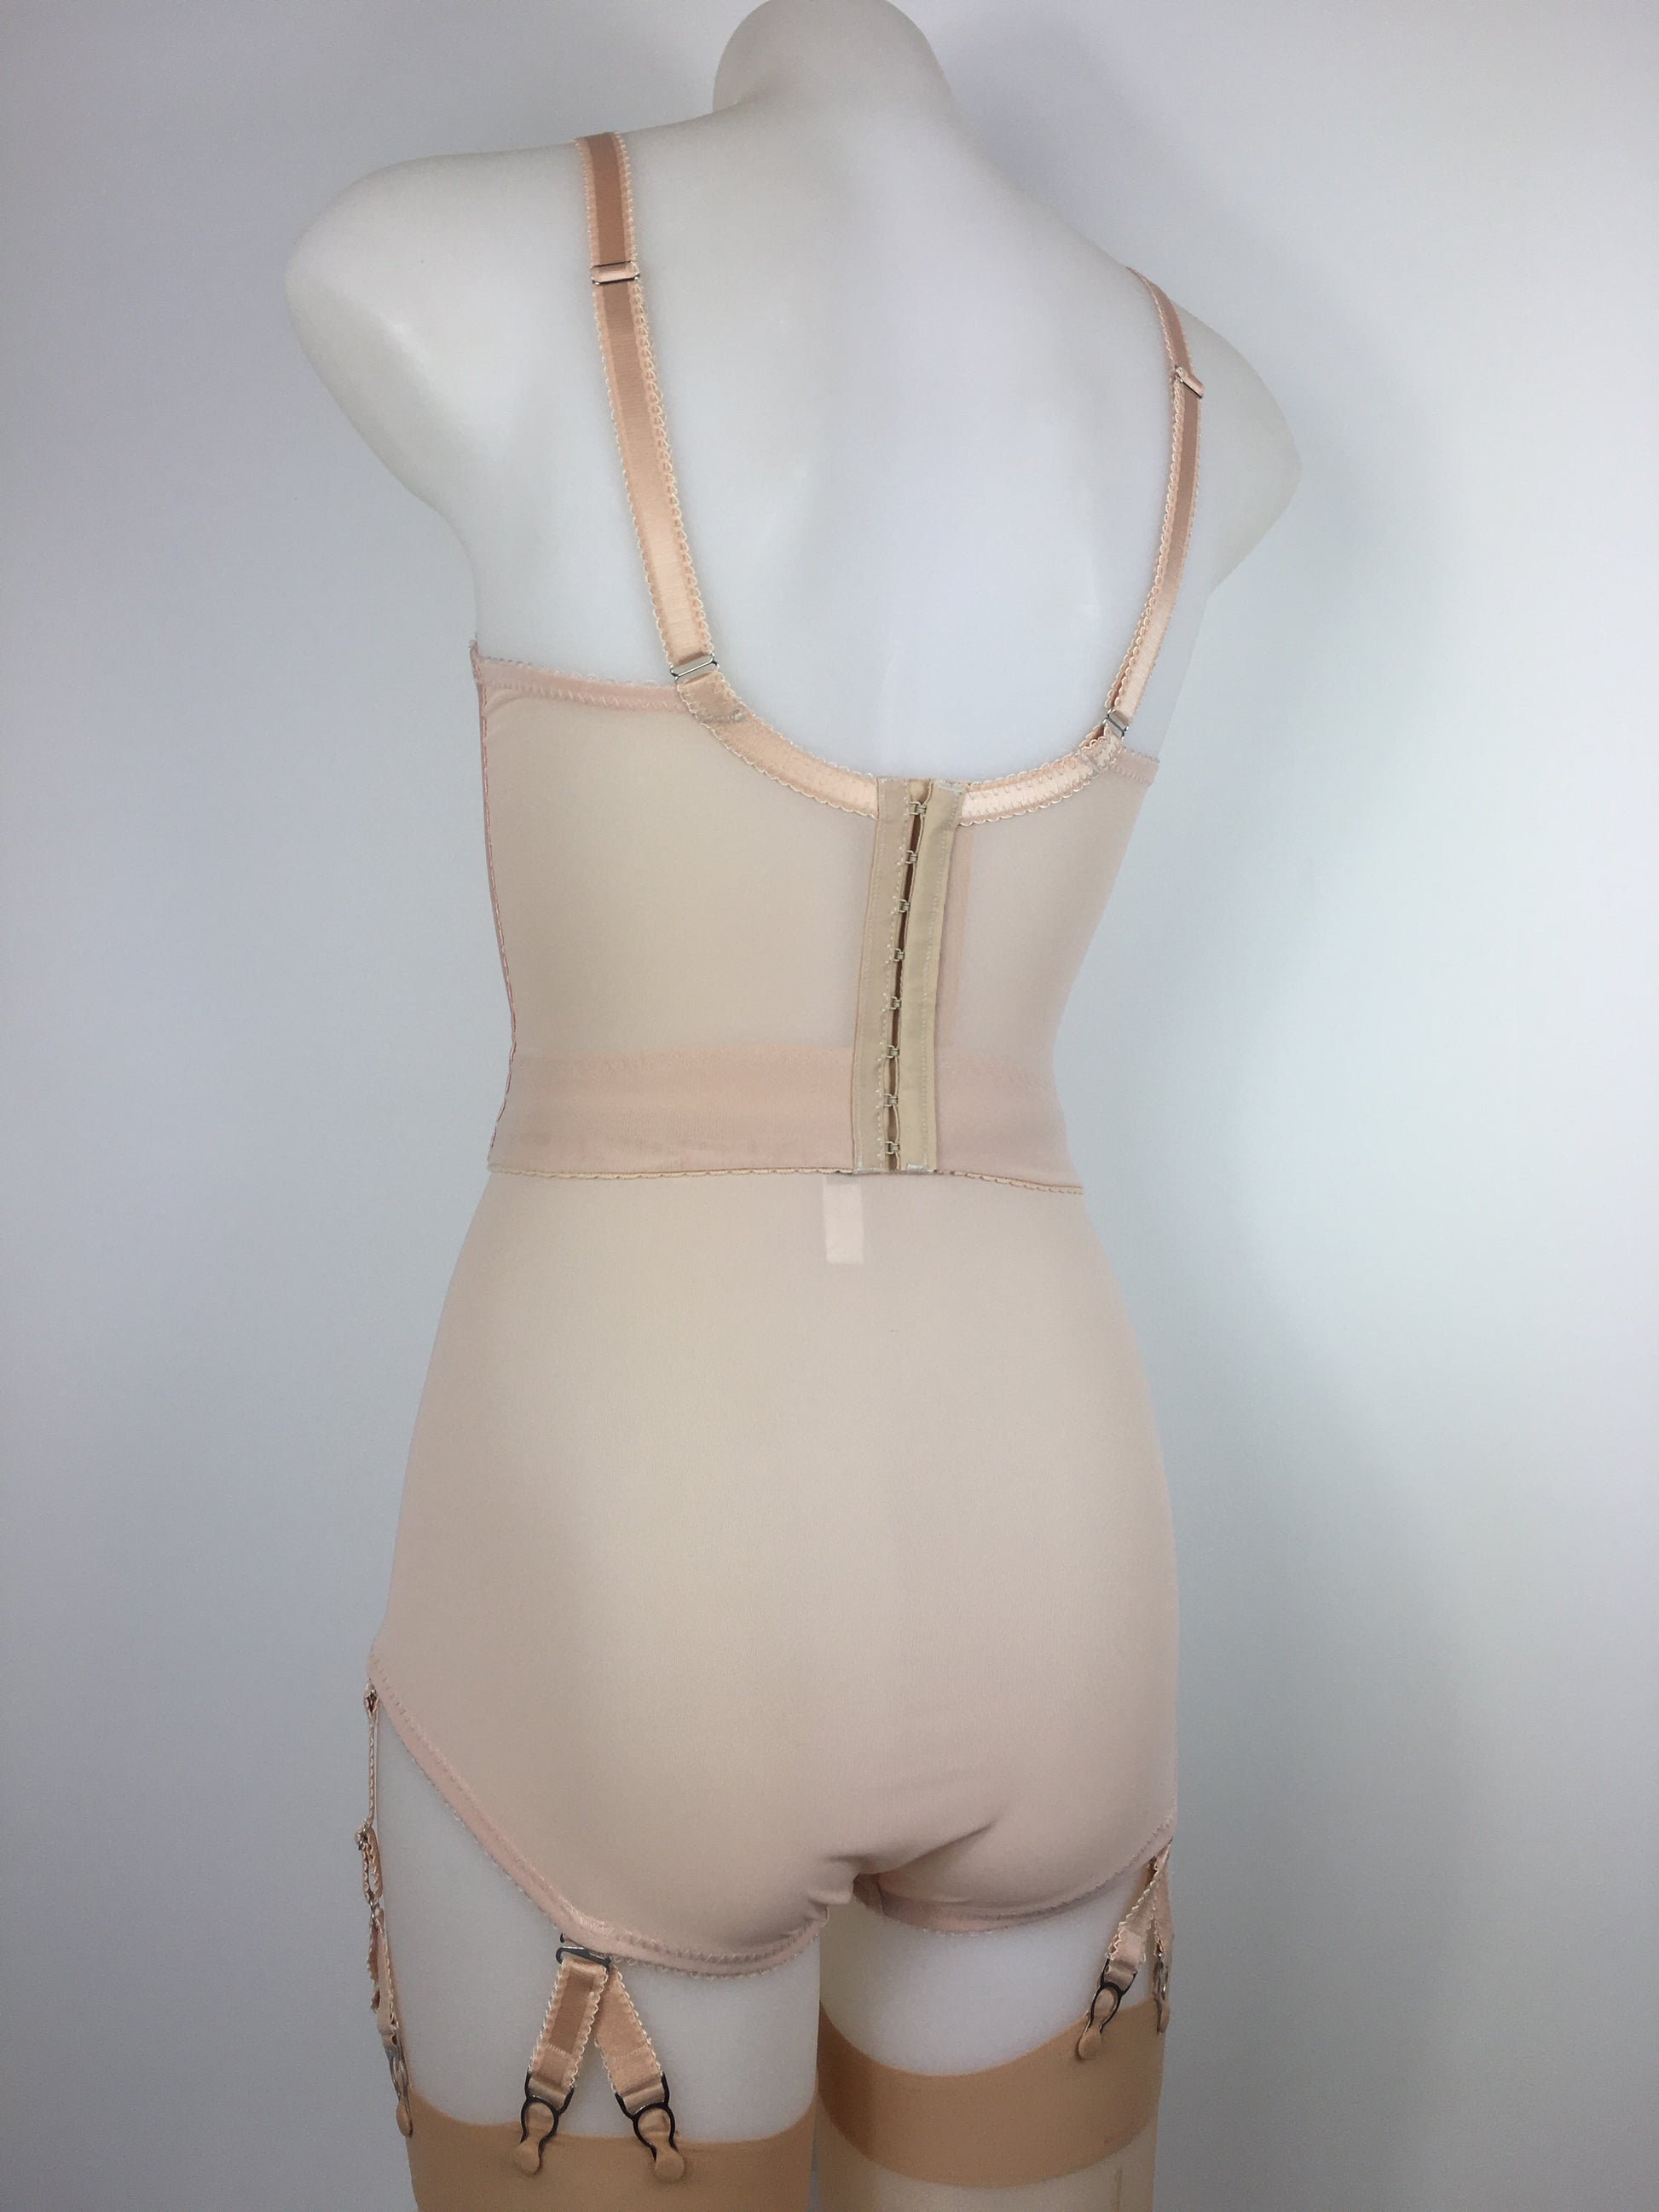 Our most authentic looking vintage inspired lingerie yet. Perfect peachy satin pantie girdle or high waisted knicker with 6 detachable Y straps, characteristic of pip and pantalaimon. Nude big shapewear knickers with garter straps to keep your seamed stockings in place all day. Fabulous faux and reproduction lingerie made in the uk